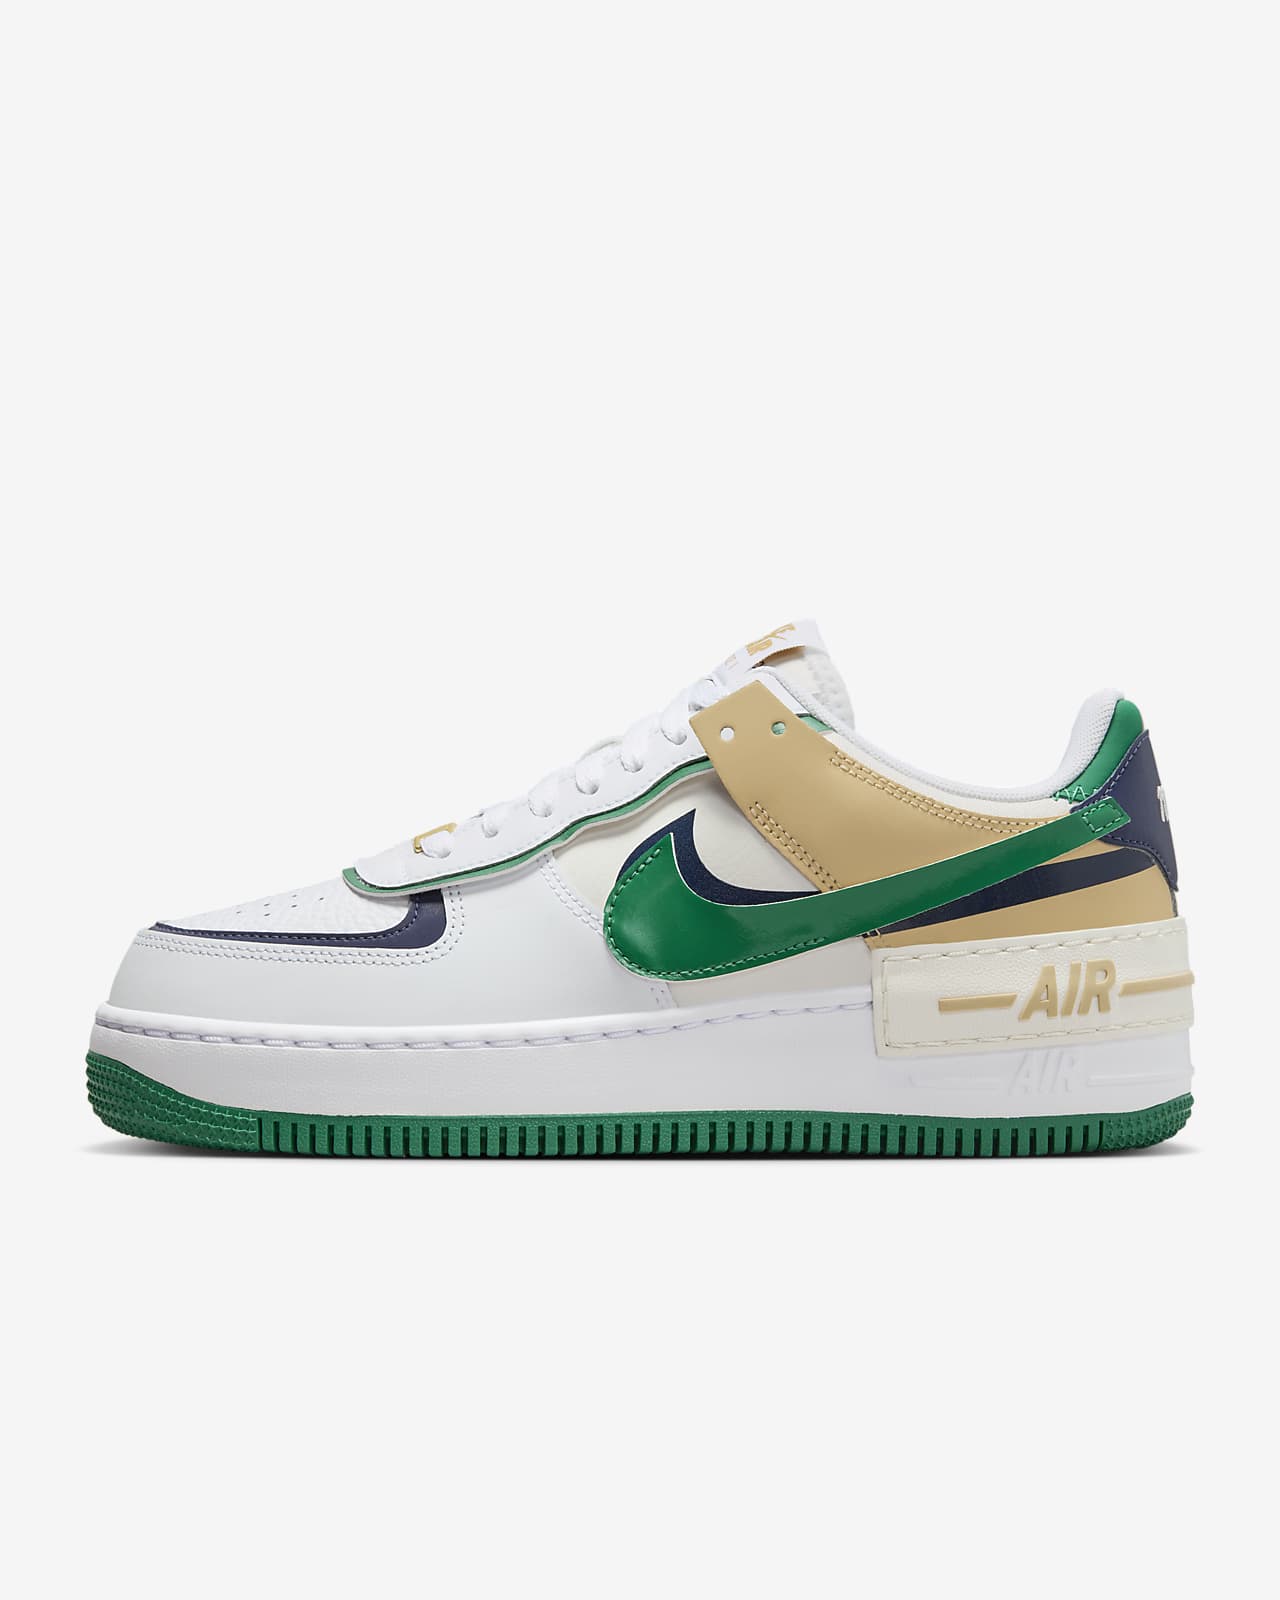 Nike WMNS Air Force 1 Low Shadow エアフォース完売続出のモデルです